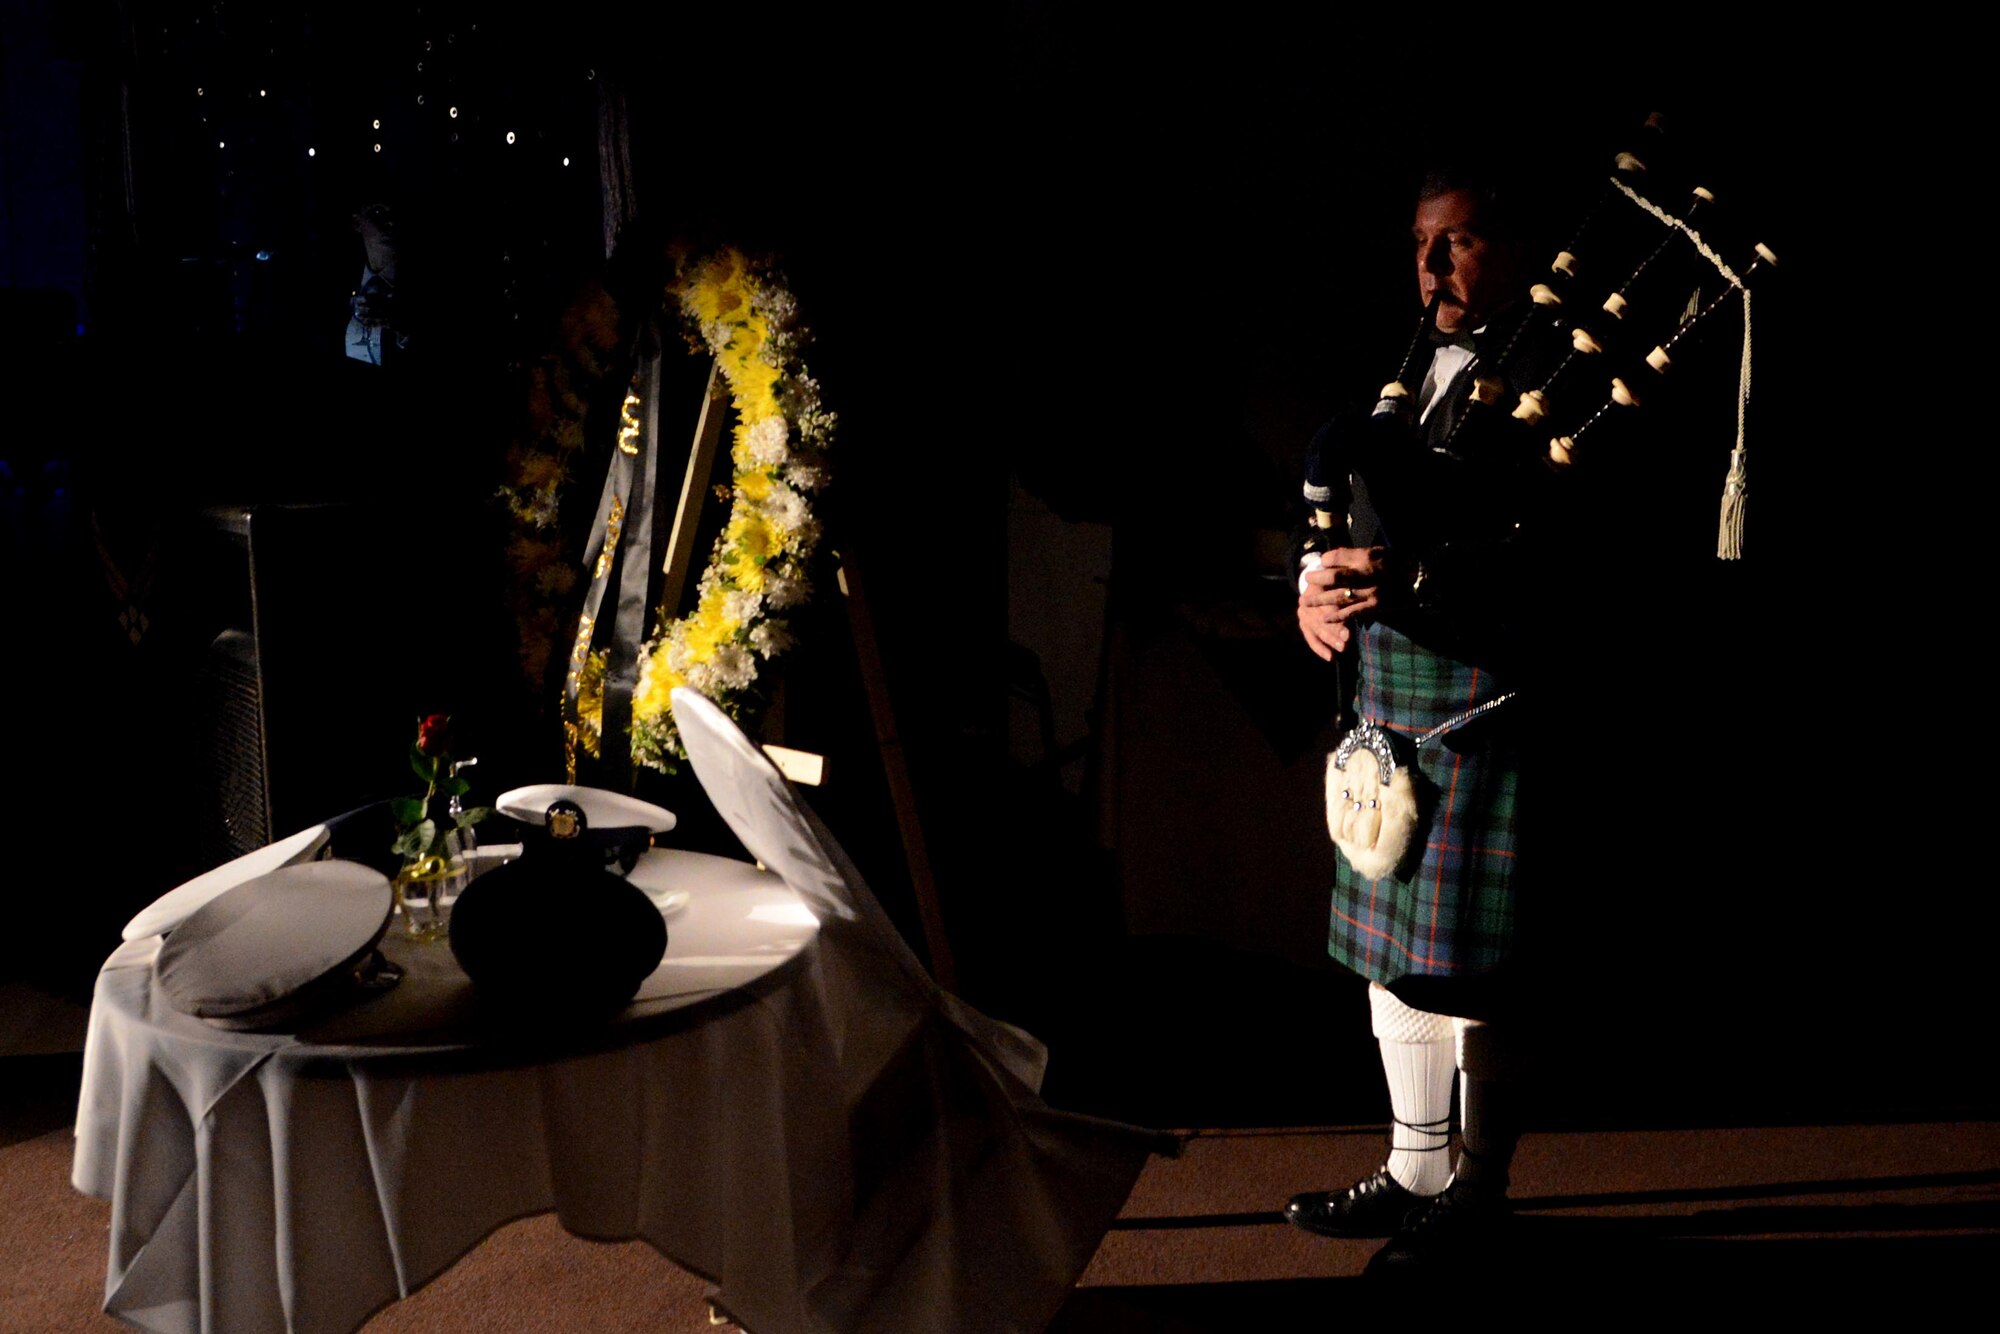 Master Sgt. Ian J. Morrison, 554th Red Horse 
Squadron superintendent, plays “Amazing Grace” on the bagpipes in remembrance of prisoners of war and those missing in action during the 66th Annual Air Force Ball Sept. 20, 2013, at Leo Palace in Yona, Guam. The POW/MIA table was displayed during the ball to pay tribute to service members who are not able to attend the event due to their sacrifice in their defense of freedom. (U.S. Air Force Photo by Airman 1st Class Emily A. 